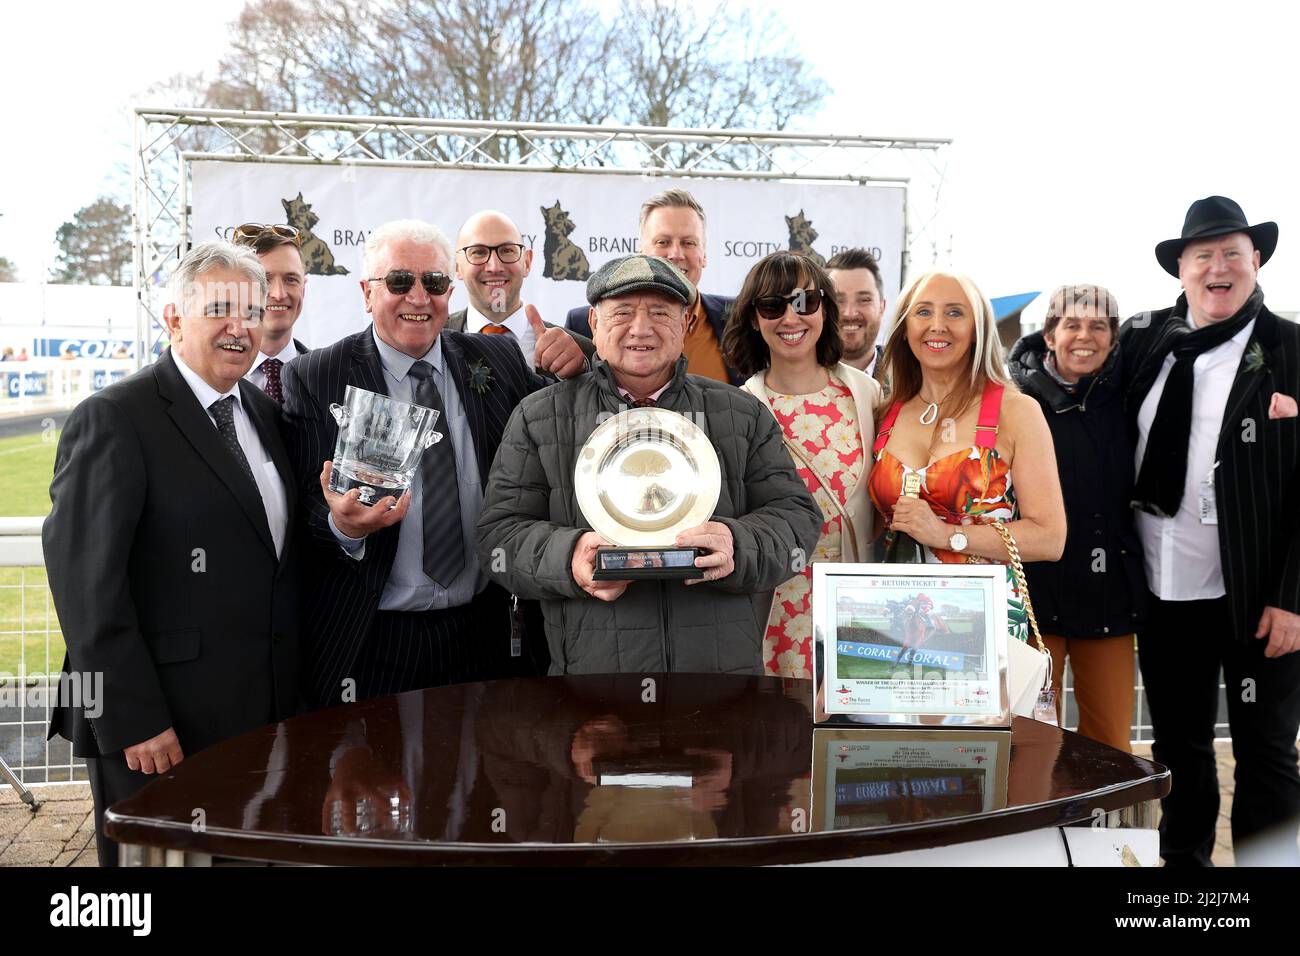 Trainer John Wade (centre) celebrates with the trophy after Return Ticket ridden by jockey Sean Quinlan wins the Scotty Brand Handicap Chase during the Coral Scottish Grand National day at Ayr Racecourse, Ayr. Picture date: Saturday April 2, 2022. Stock Photo